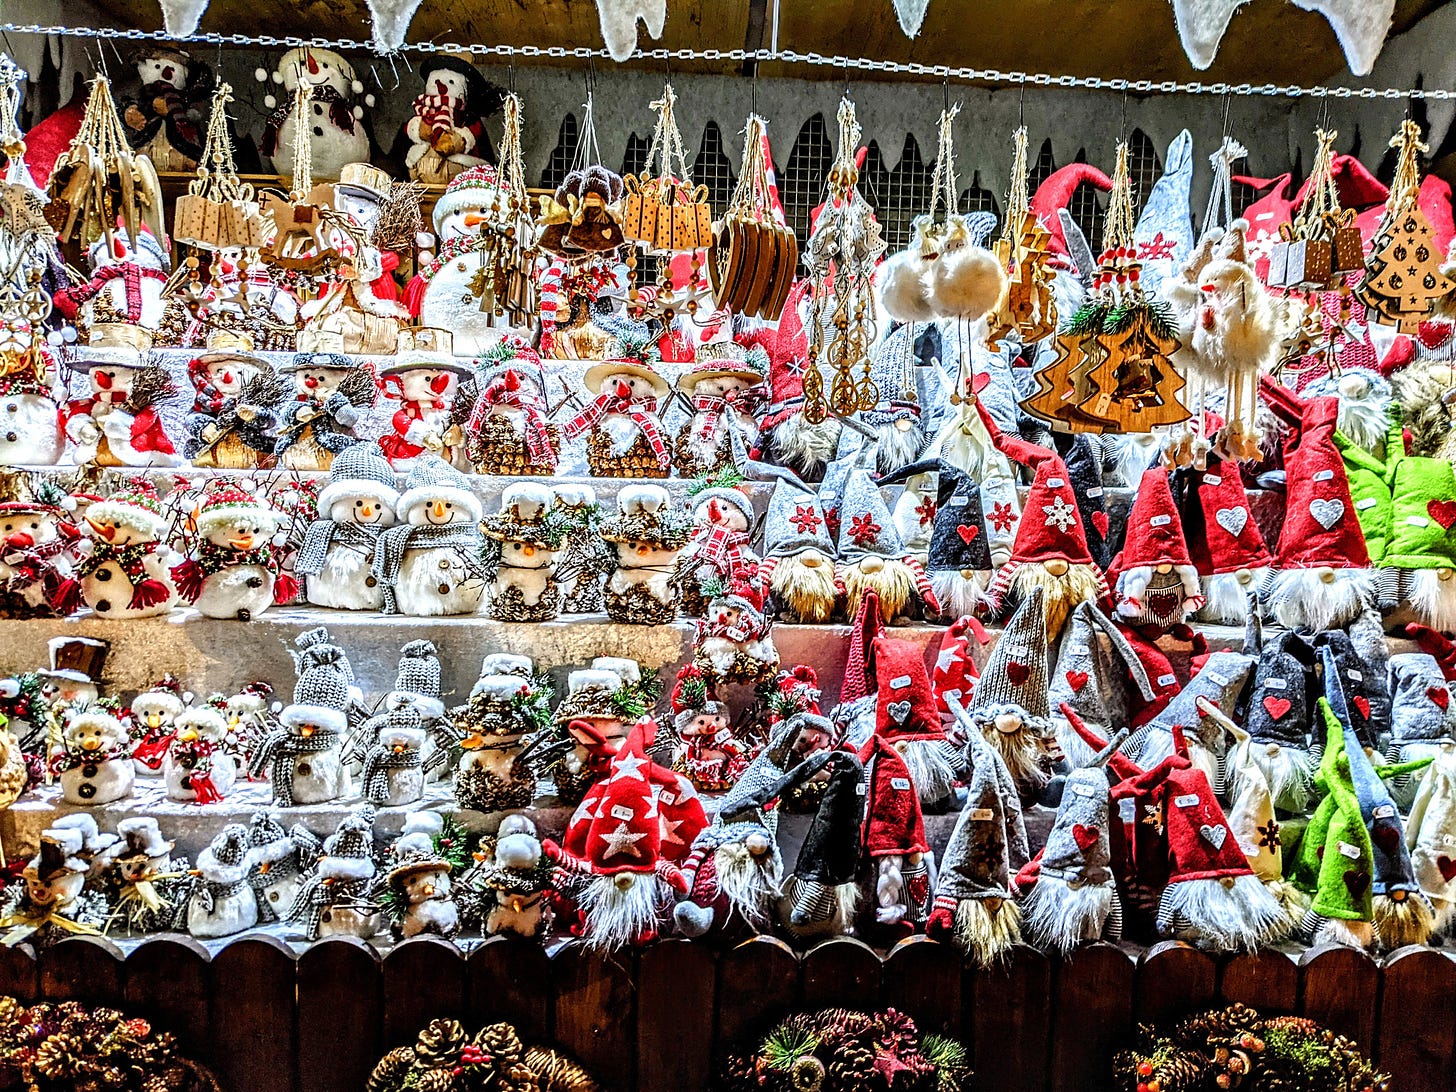 A collection of snowmen, elves, and other Christmas decorations for sale at a book in Vienna's Christkindlmarkt.